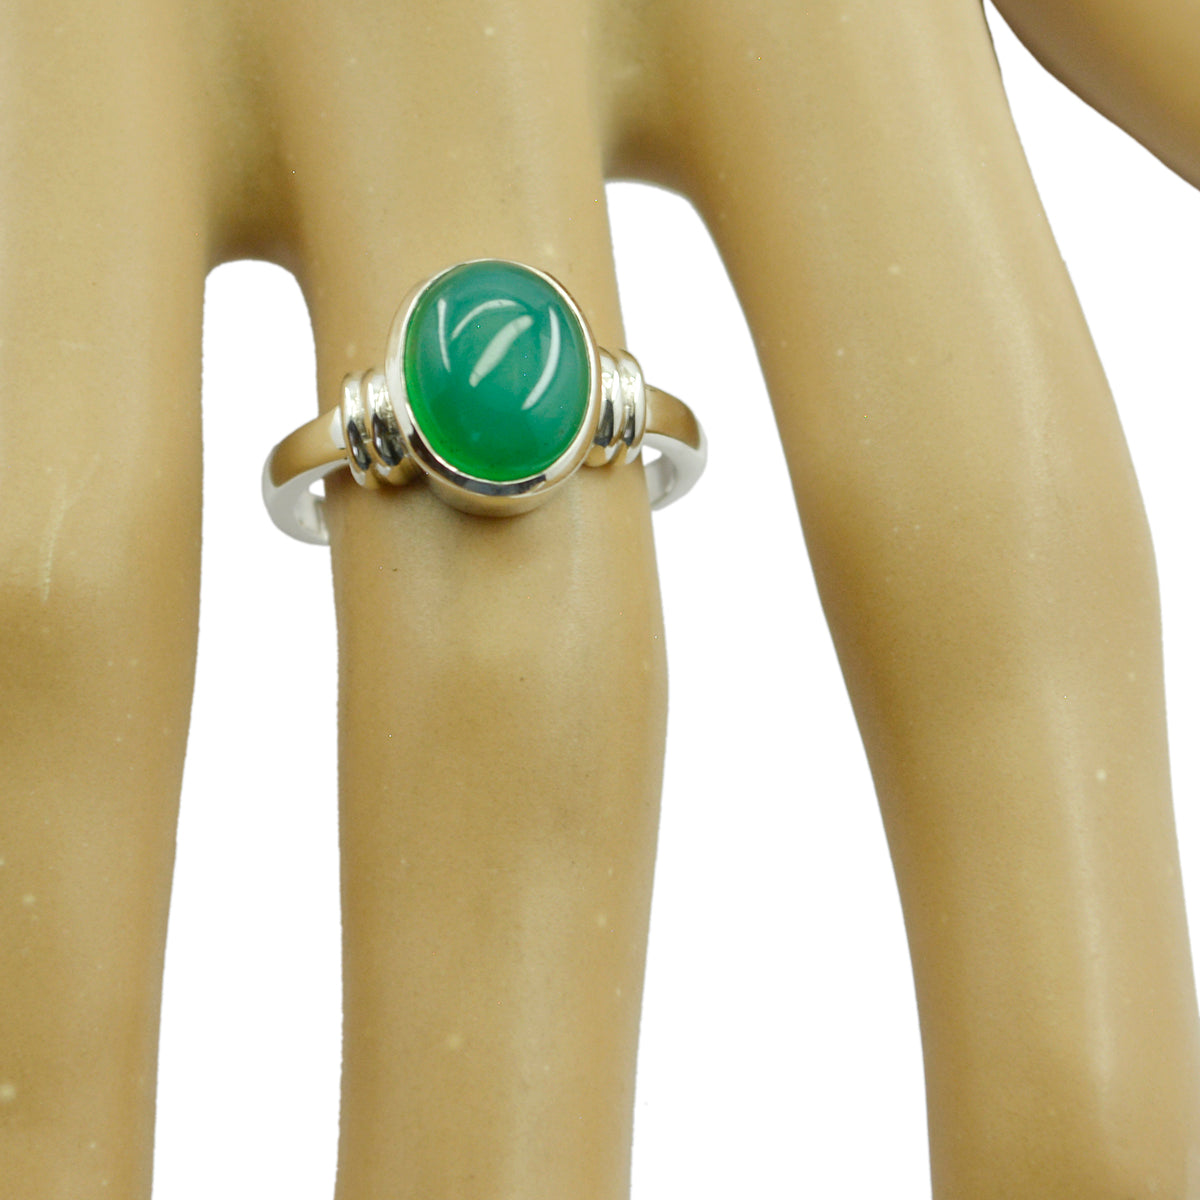 Marvelous Gemstones Green Onyx 925 Sterling Silver Ring Jewelry Box